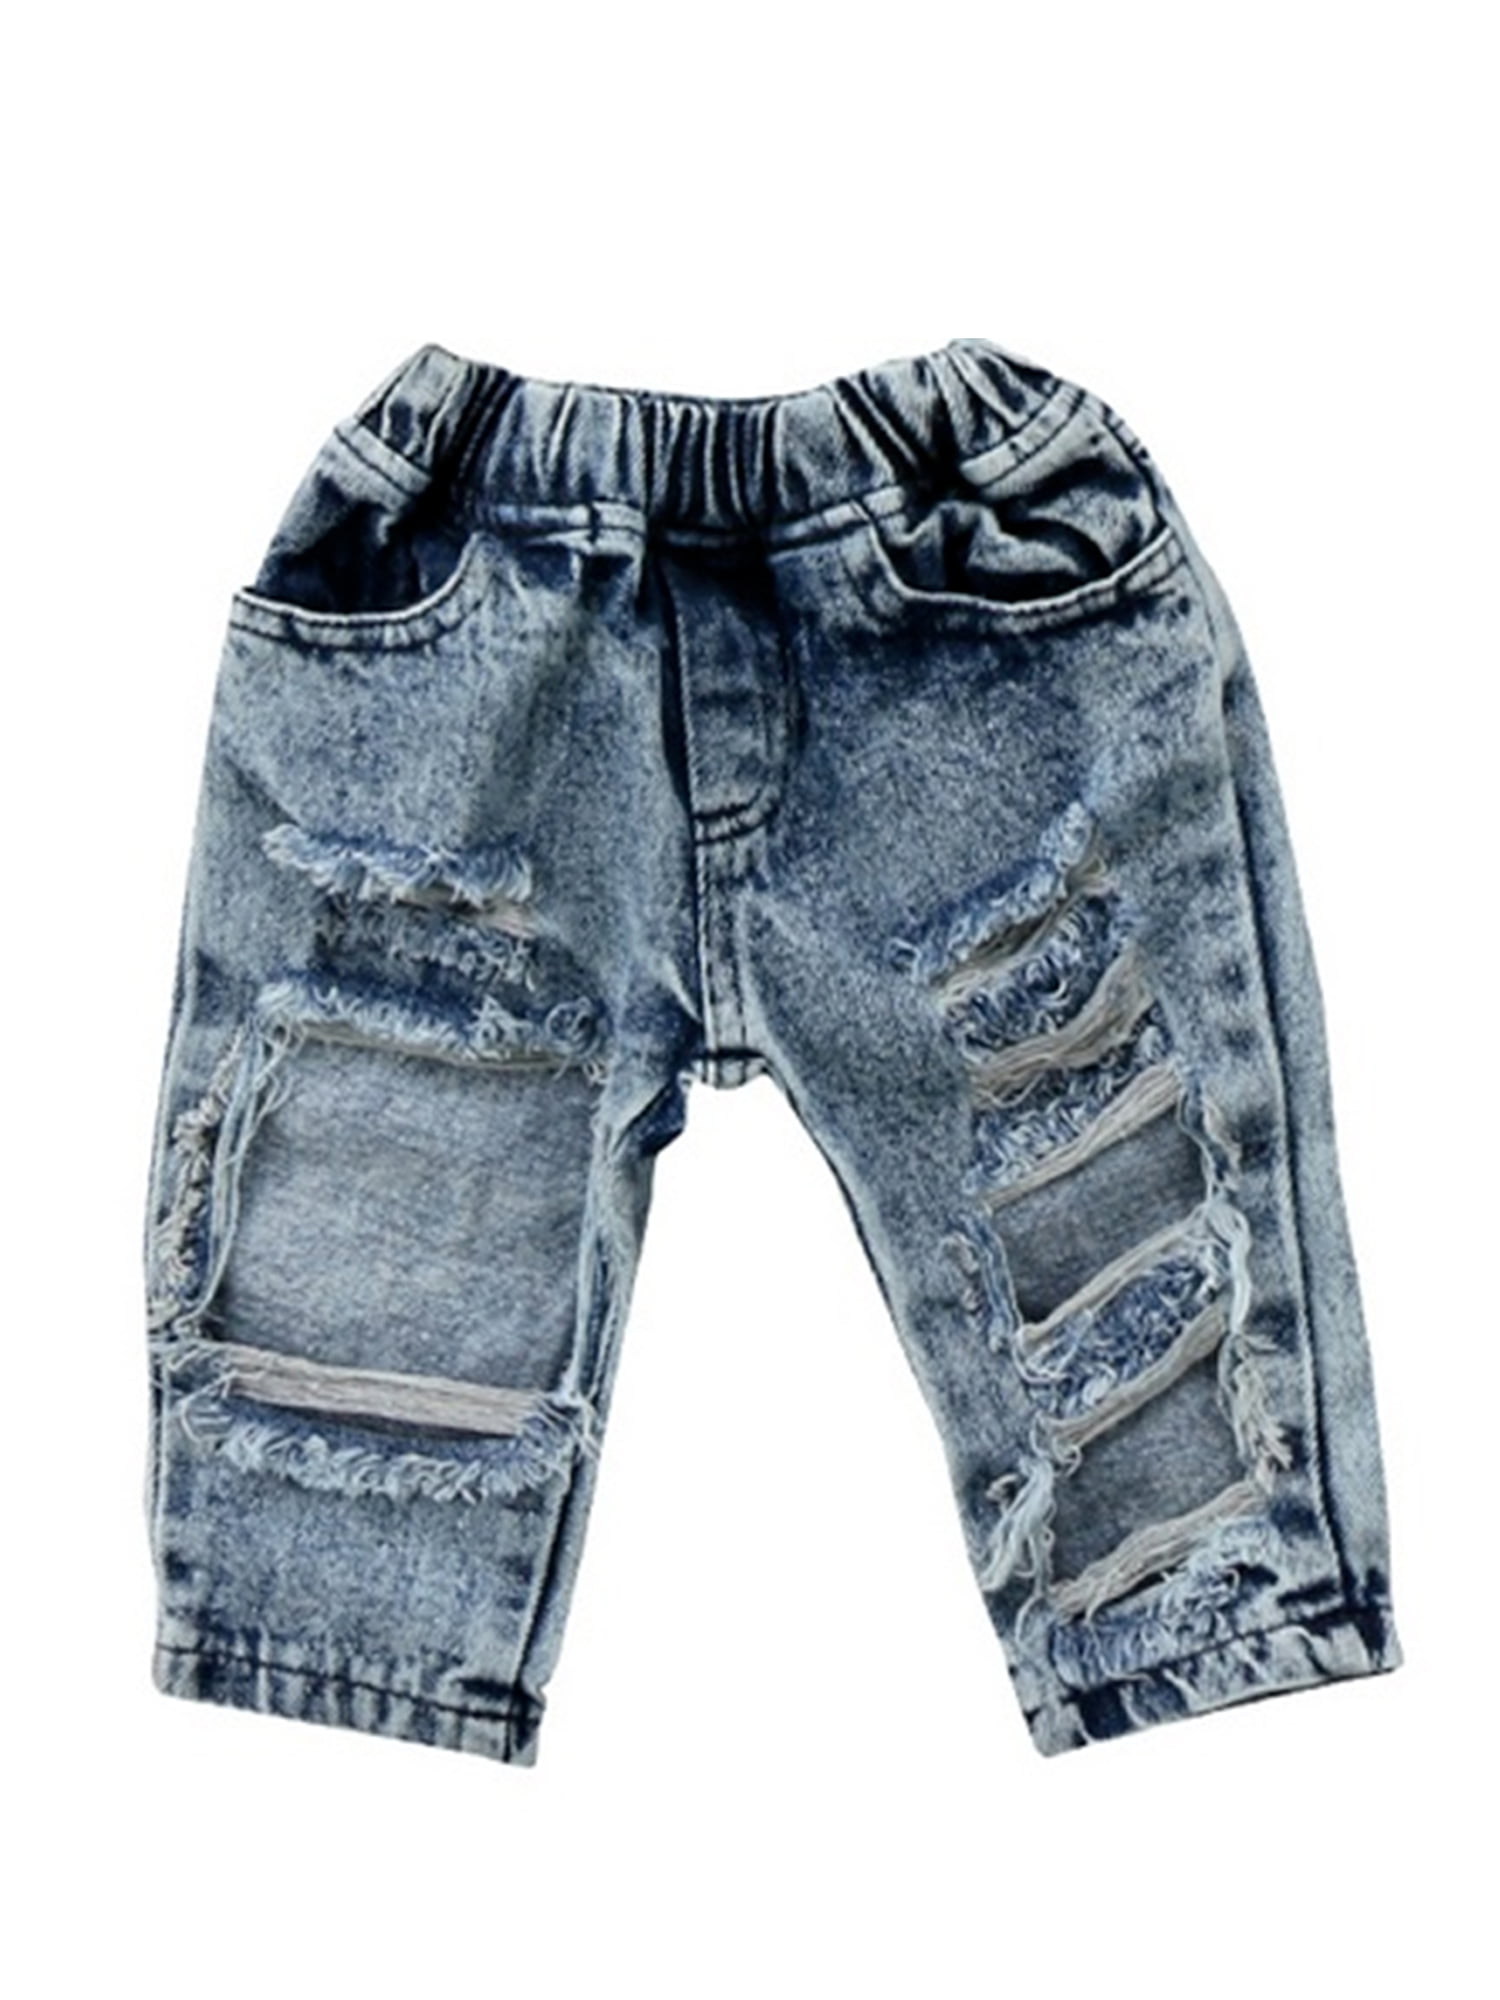 Kids Baby Girls Ripped Holes Denim Pants Jeans Set Clothes Long Fashion Cool Trousers -